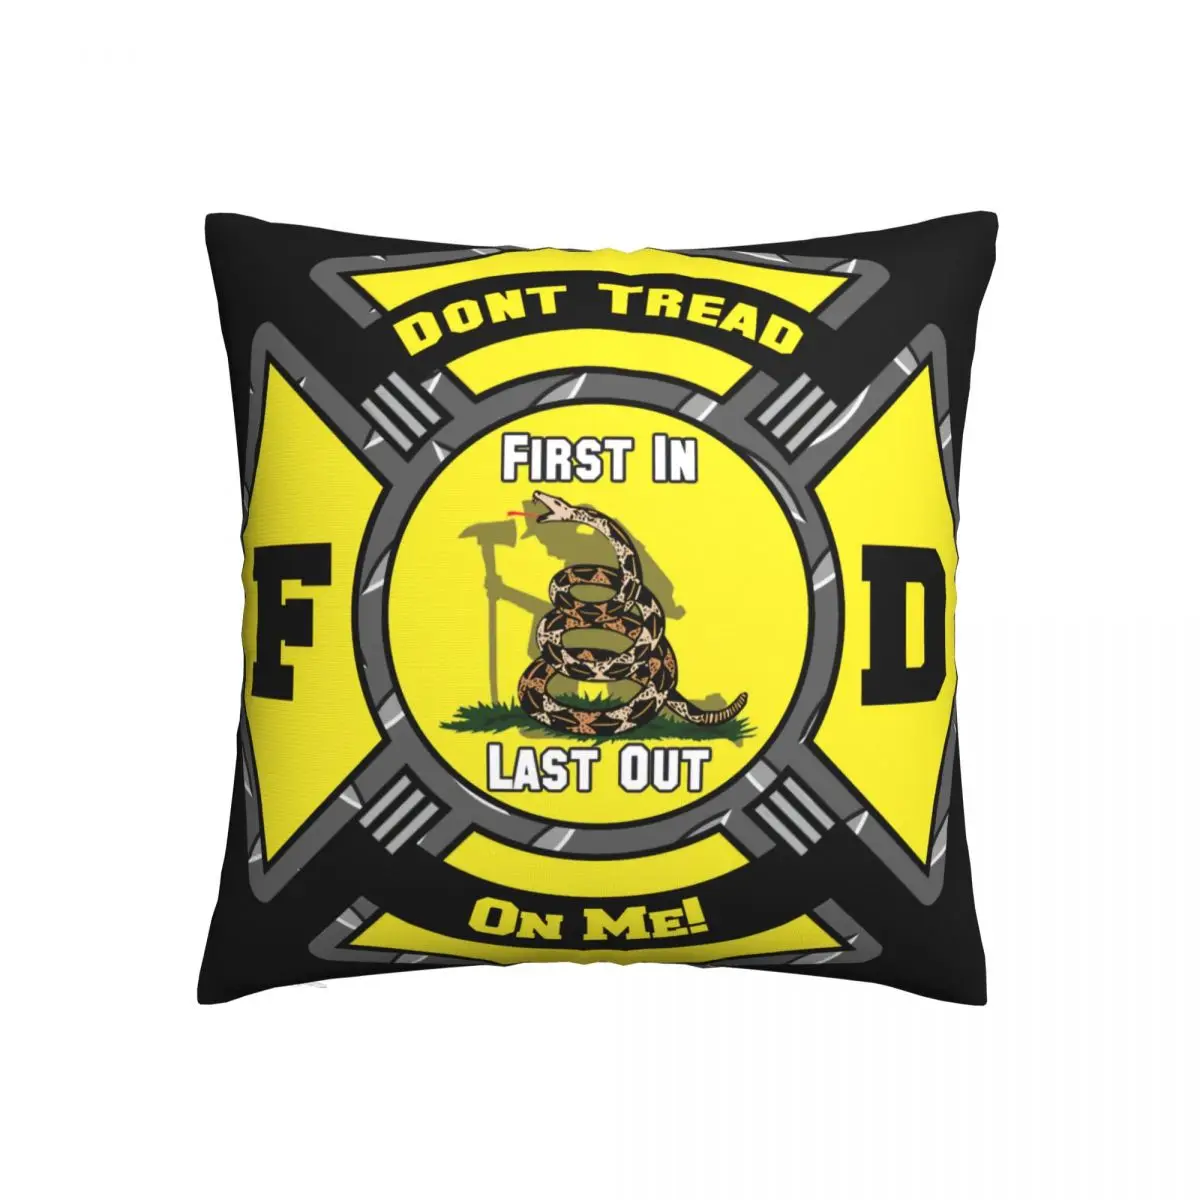 

Don't Tread On Me all-match pillowcases, cushions, seat beds and car pillowcases in various sizes